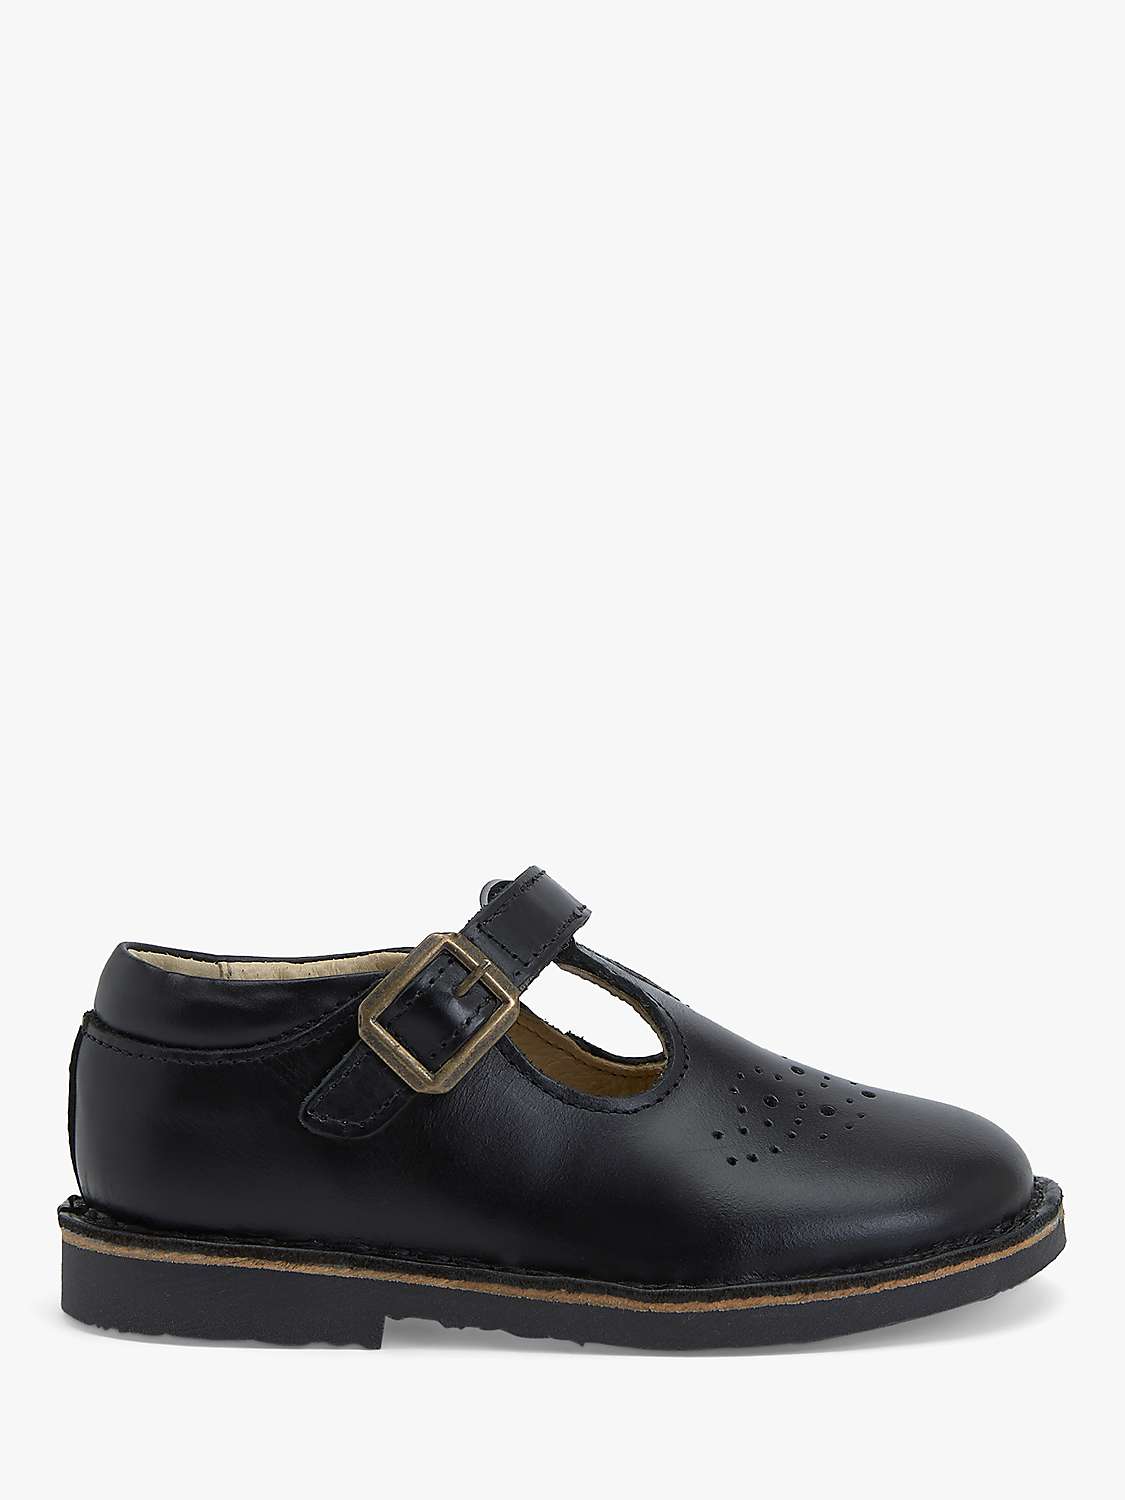 Buy Young Soles Kids' Penny T-Bar Leather Shoes Online at johnlewis.com